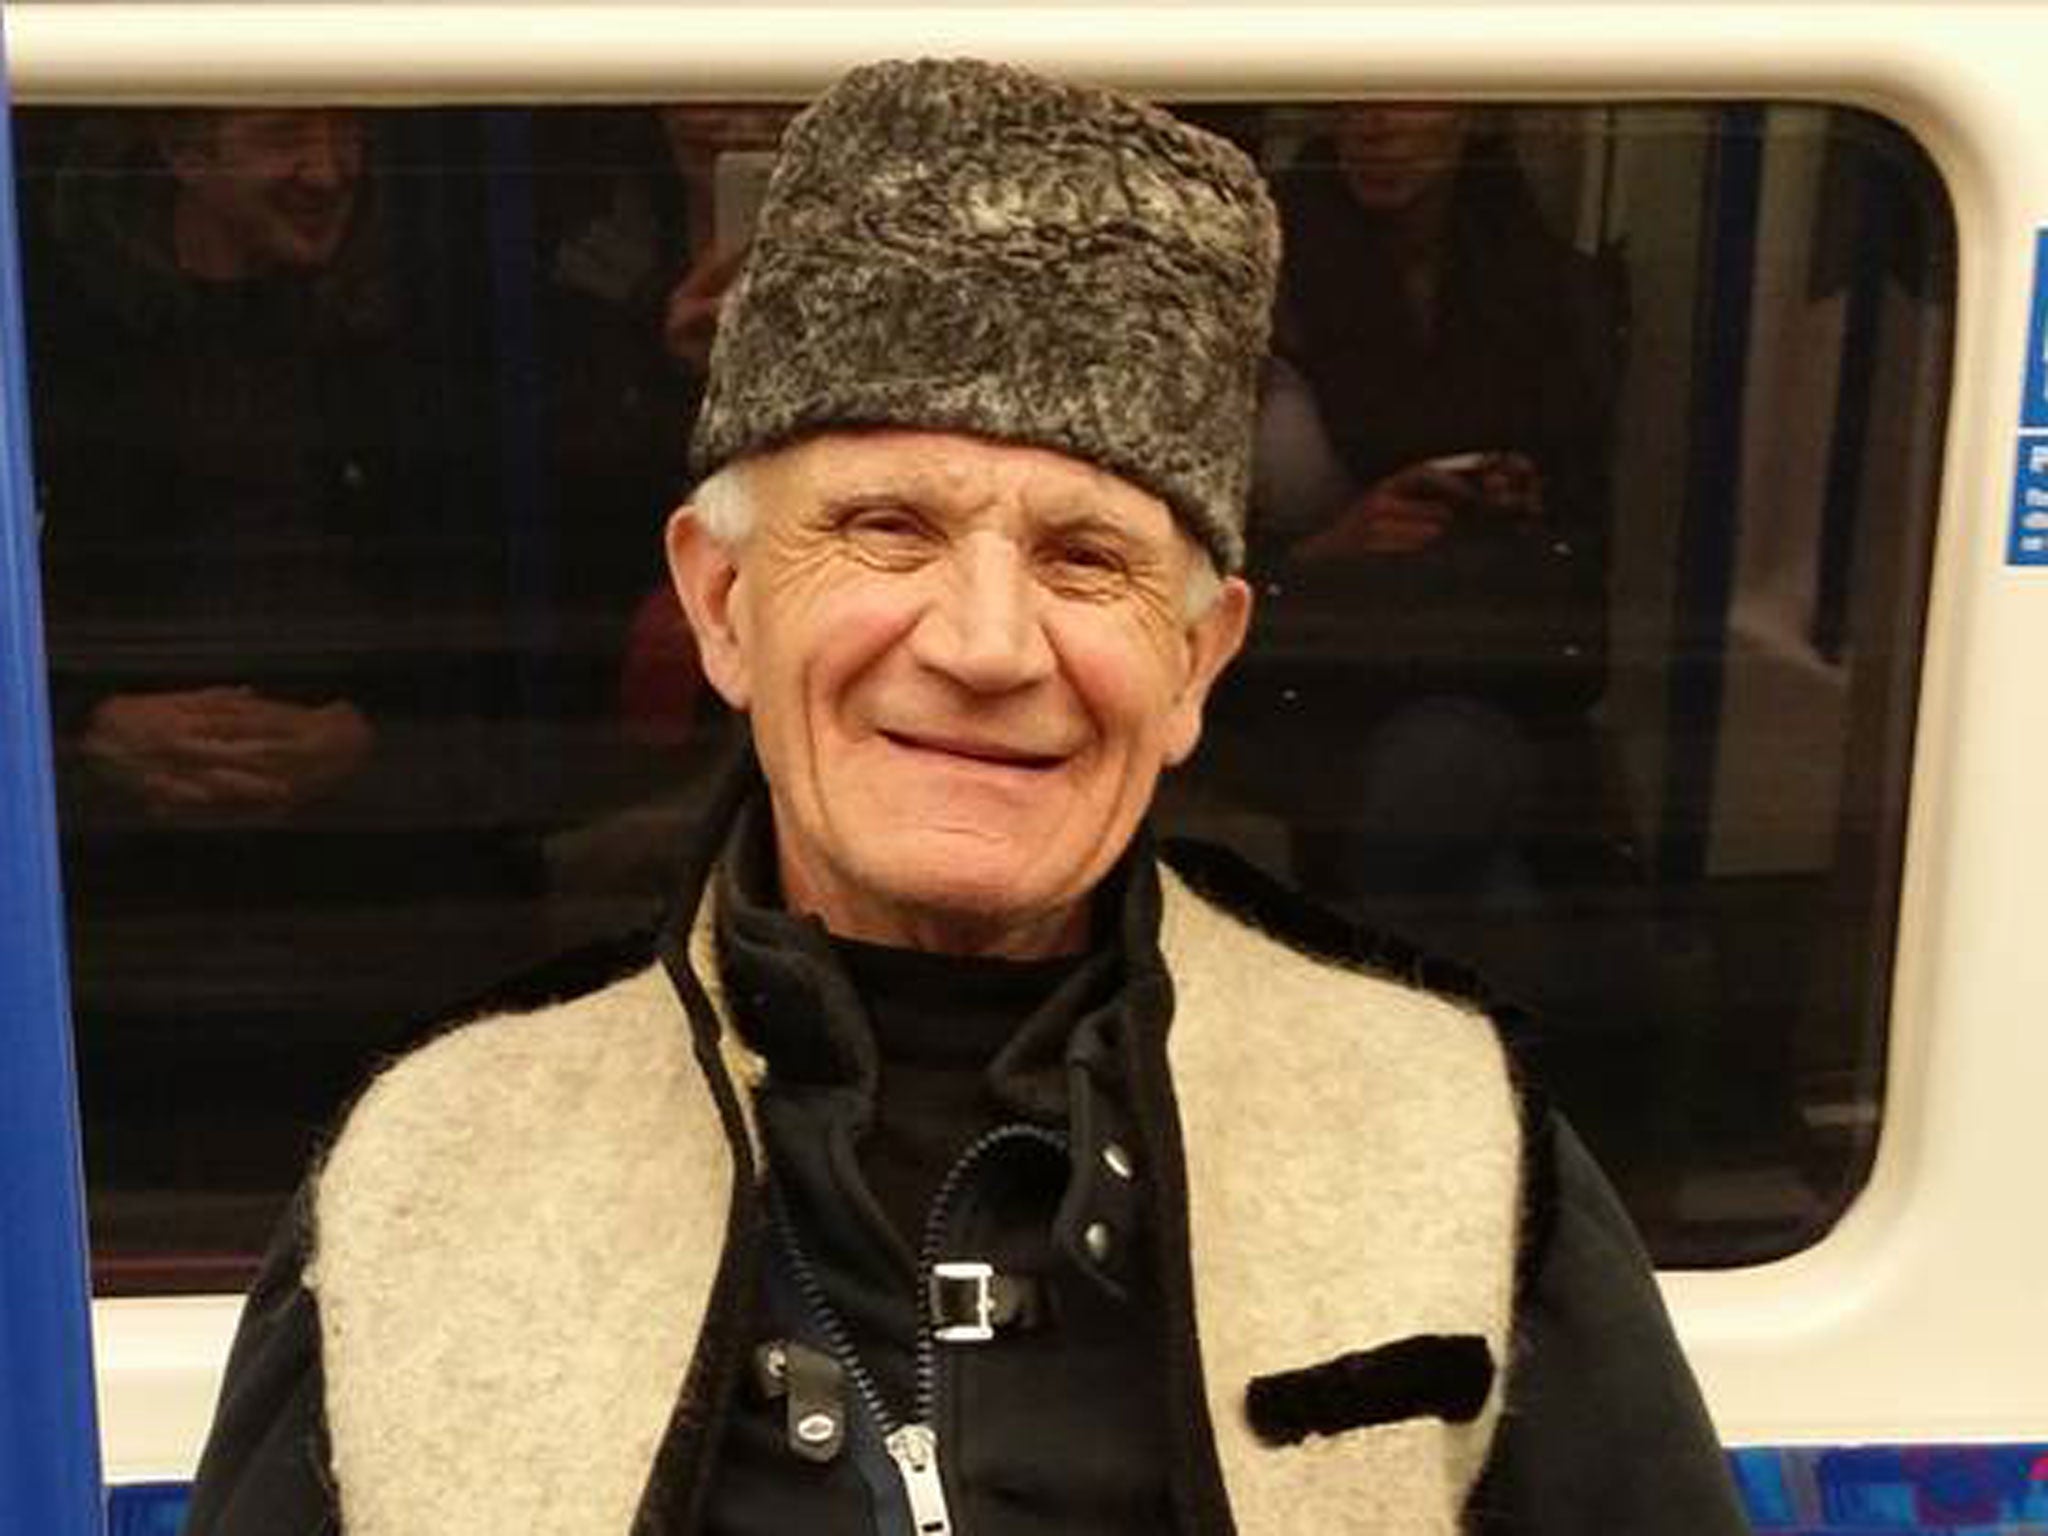 Vasile Belea went missing at Stockwell station